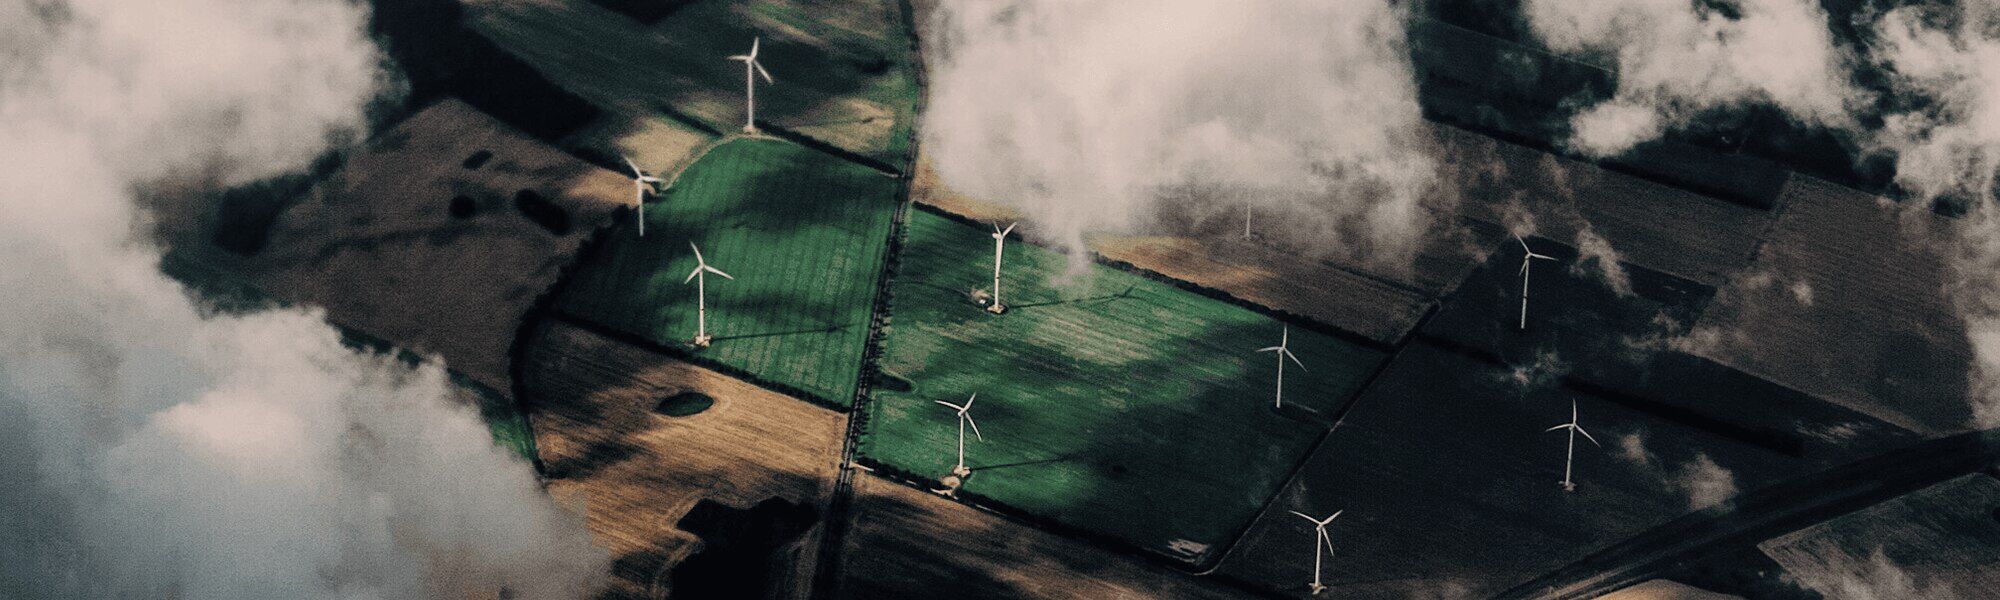 Field with wind turbine look from above.